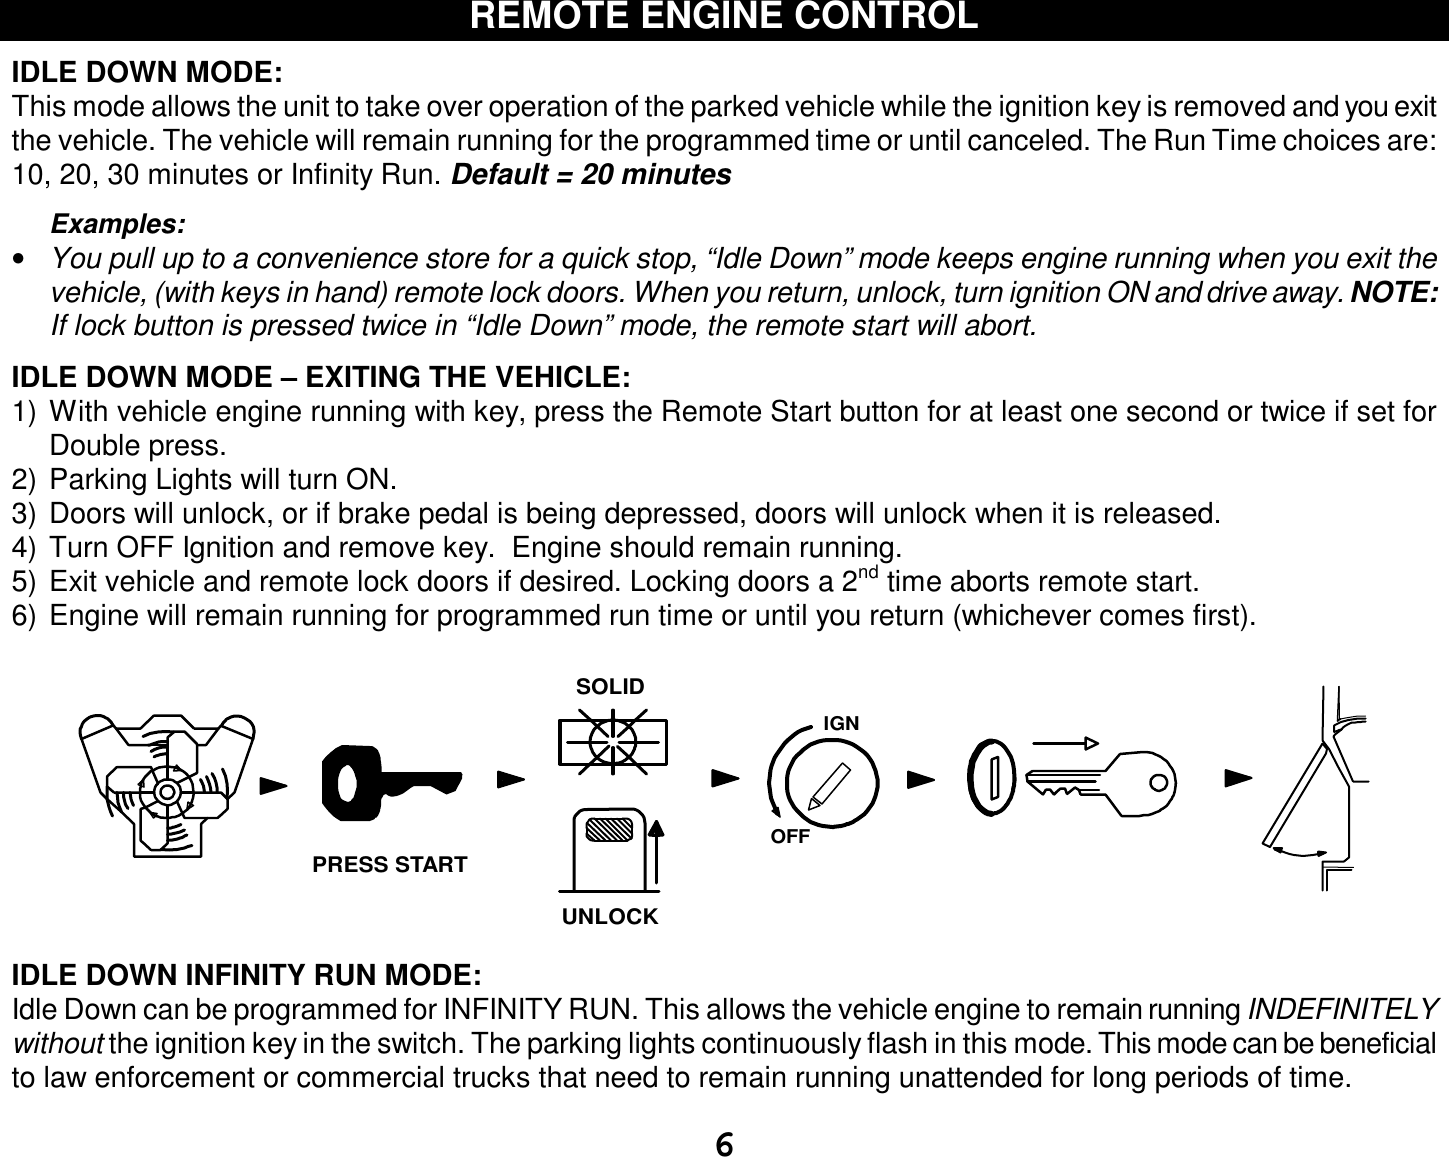  6 REMOTE ENGINE CONTROL  IDLE DOWN MODE: This mode allows the unit to take over operation of the parked vehicle while the ignition key is removed and you exit the vehicle. The vehicle will remain running for the programmed time or until canceled. The Run Time choices are: 10, 20, 30 minutes or Infinity Run. Default = 20 minutes  Examples: • You pull up to a convenience store for a quick stop, “Idle Down” mode keeps engine running when you exit the vehicle, (with keys in hand) remote lock doors. When you return, unlock, turn ignition ON and drive away. NOTE: If lock button is pressed twice in “Idle Down” mode, the remote start will abort.  IDLE DOWN MODE – EXITING THE VEHICLE: 1) With vehicle engine running with key, press the Remote Start button for at least one second or twice if set for Double press. 2) Parking Lights will turn ON. 3) Doors will unlock, or if brake pedal is being depressed, doors will unlock when it is released. 4) Turn OFF Ignition and remove key.  Engine should remain running. 5) Exit vehicle and remote lock doors if desired. Locking doors a 2nd time aborts remote start. 6) Engine will remain running for programmed run time or until you return (whichever comes first).  IGNSOLIDOFFUNLOCKPRESS START IDLE DOWN INFINITY RUN MODE:  Idle Down can be programmed for INFINITY RUN. This allows the vehicle engine to remain running INDEFINITELY without the ignition key in the switch. The parking lights continuously flash in this mode. This mode can be beneficial to law enforcement or commercial trucks that need to remain running unattended for long periods of time. 